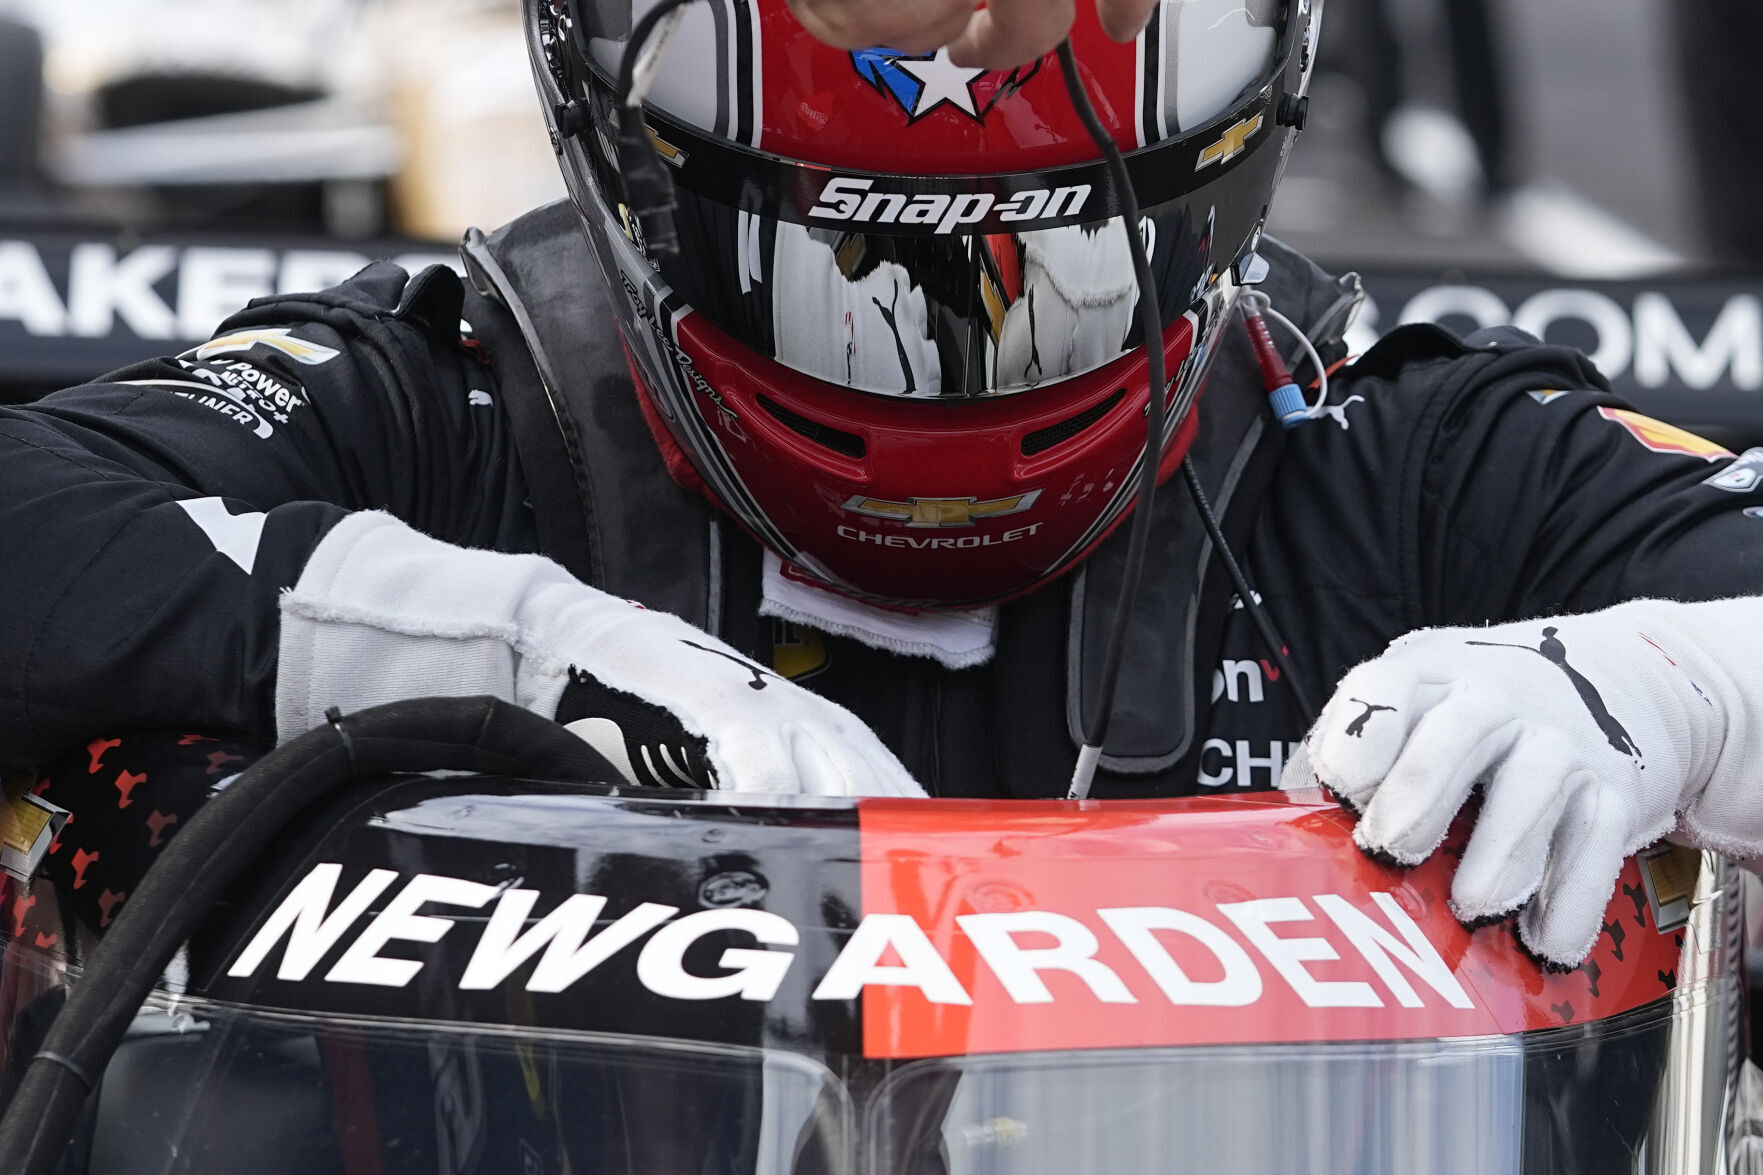 Newgarden begins another quest for elusive Indy 500 win